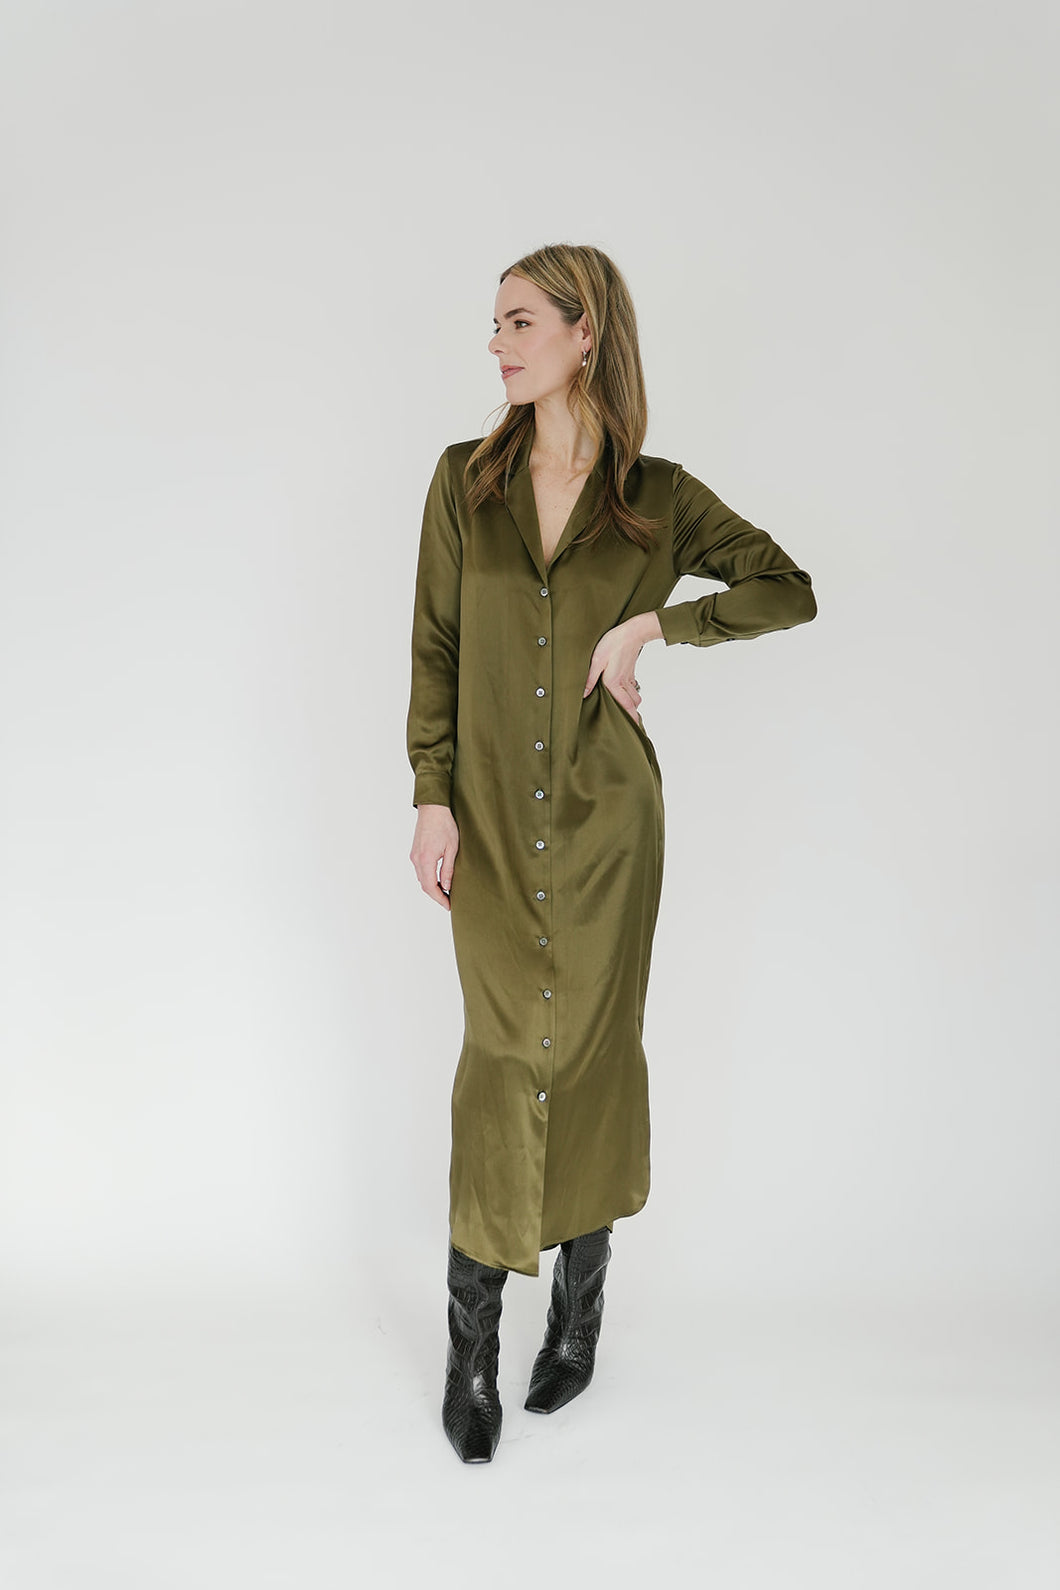 Serena Dress in Olive - CCH Collection